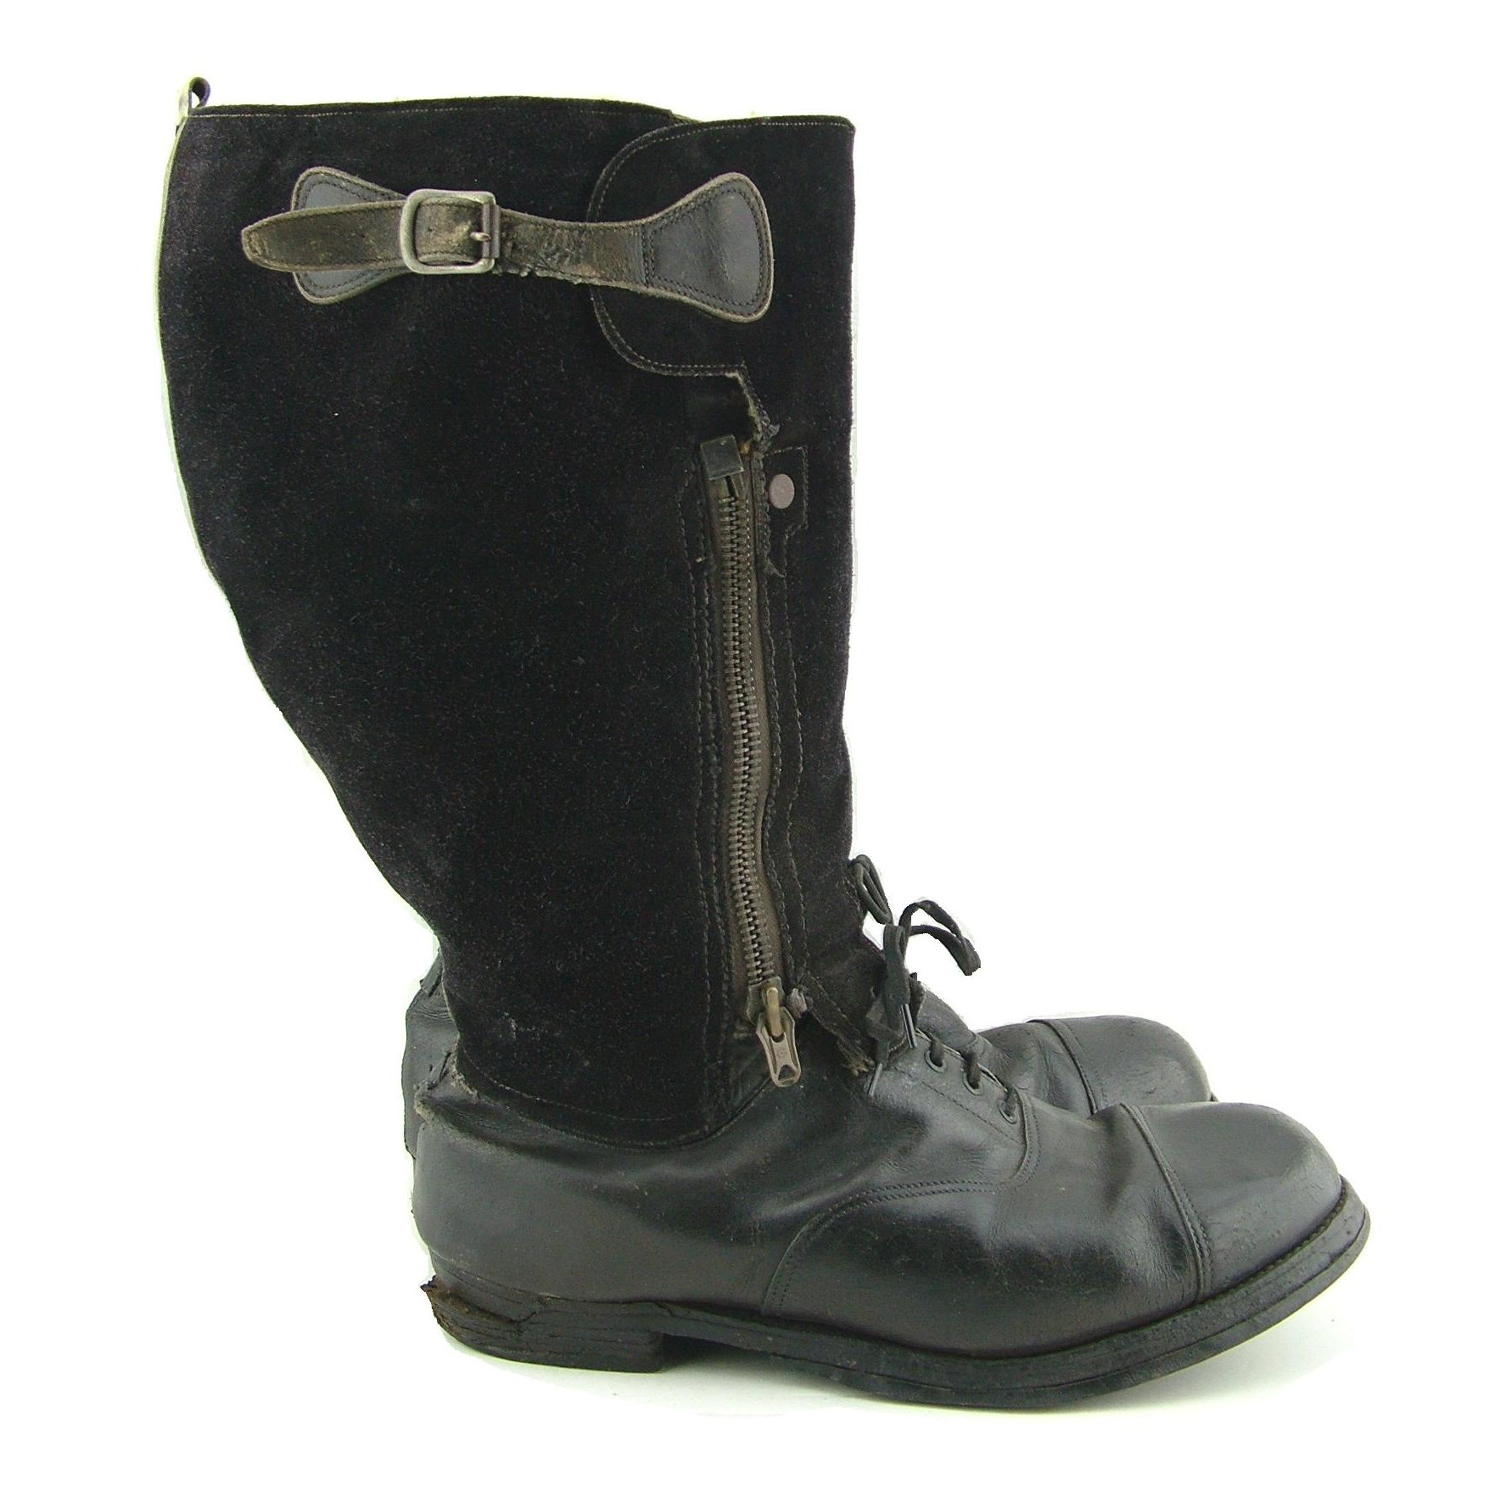 RAF 1943 pattern flying boots